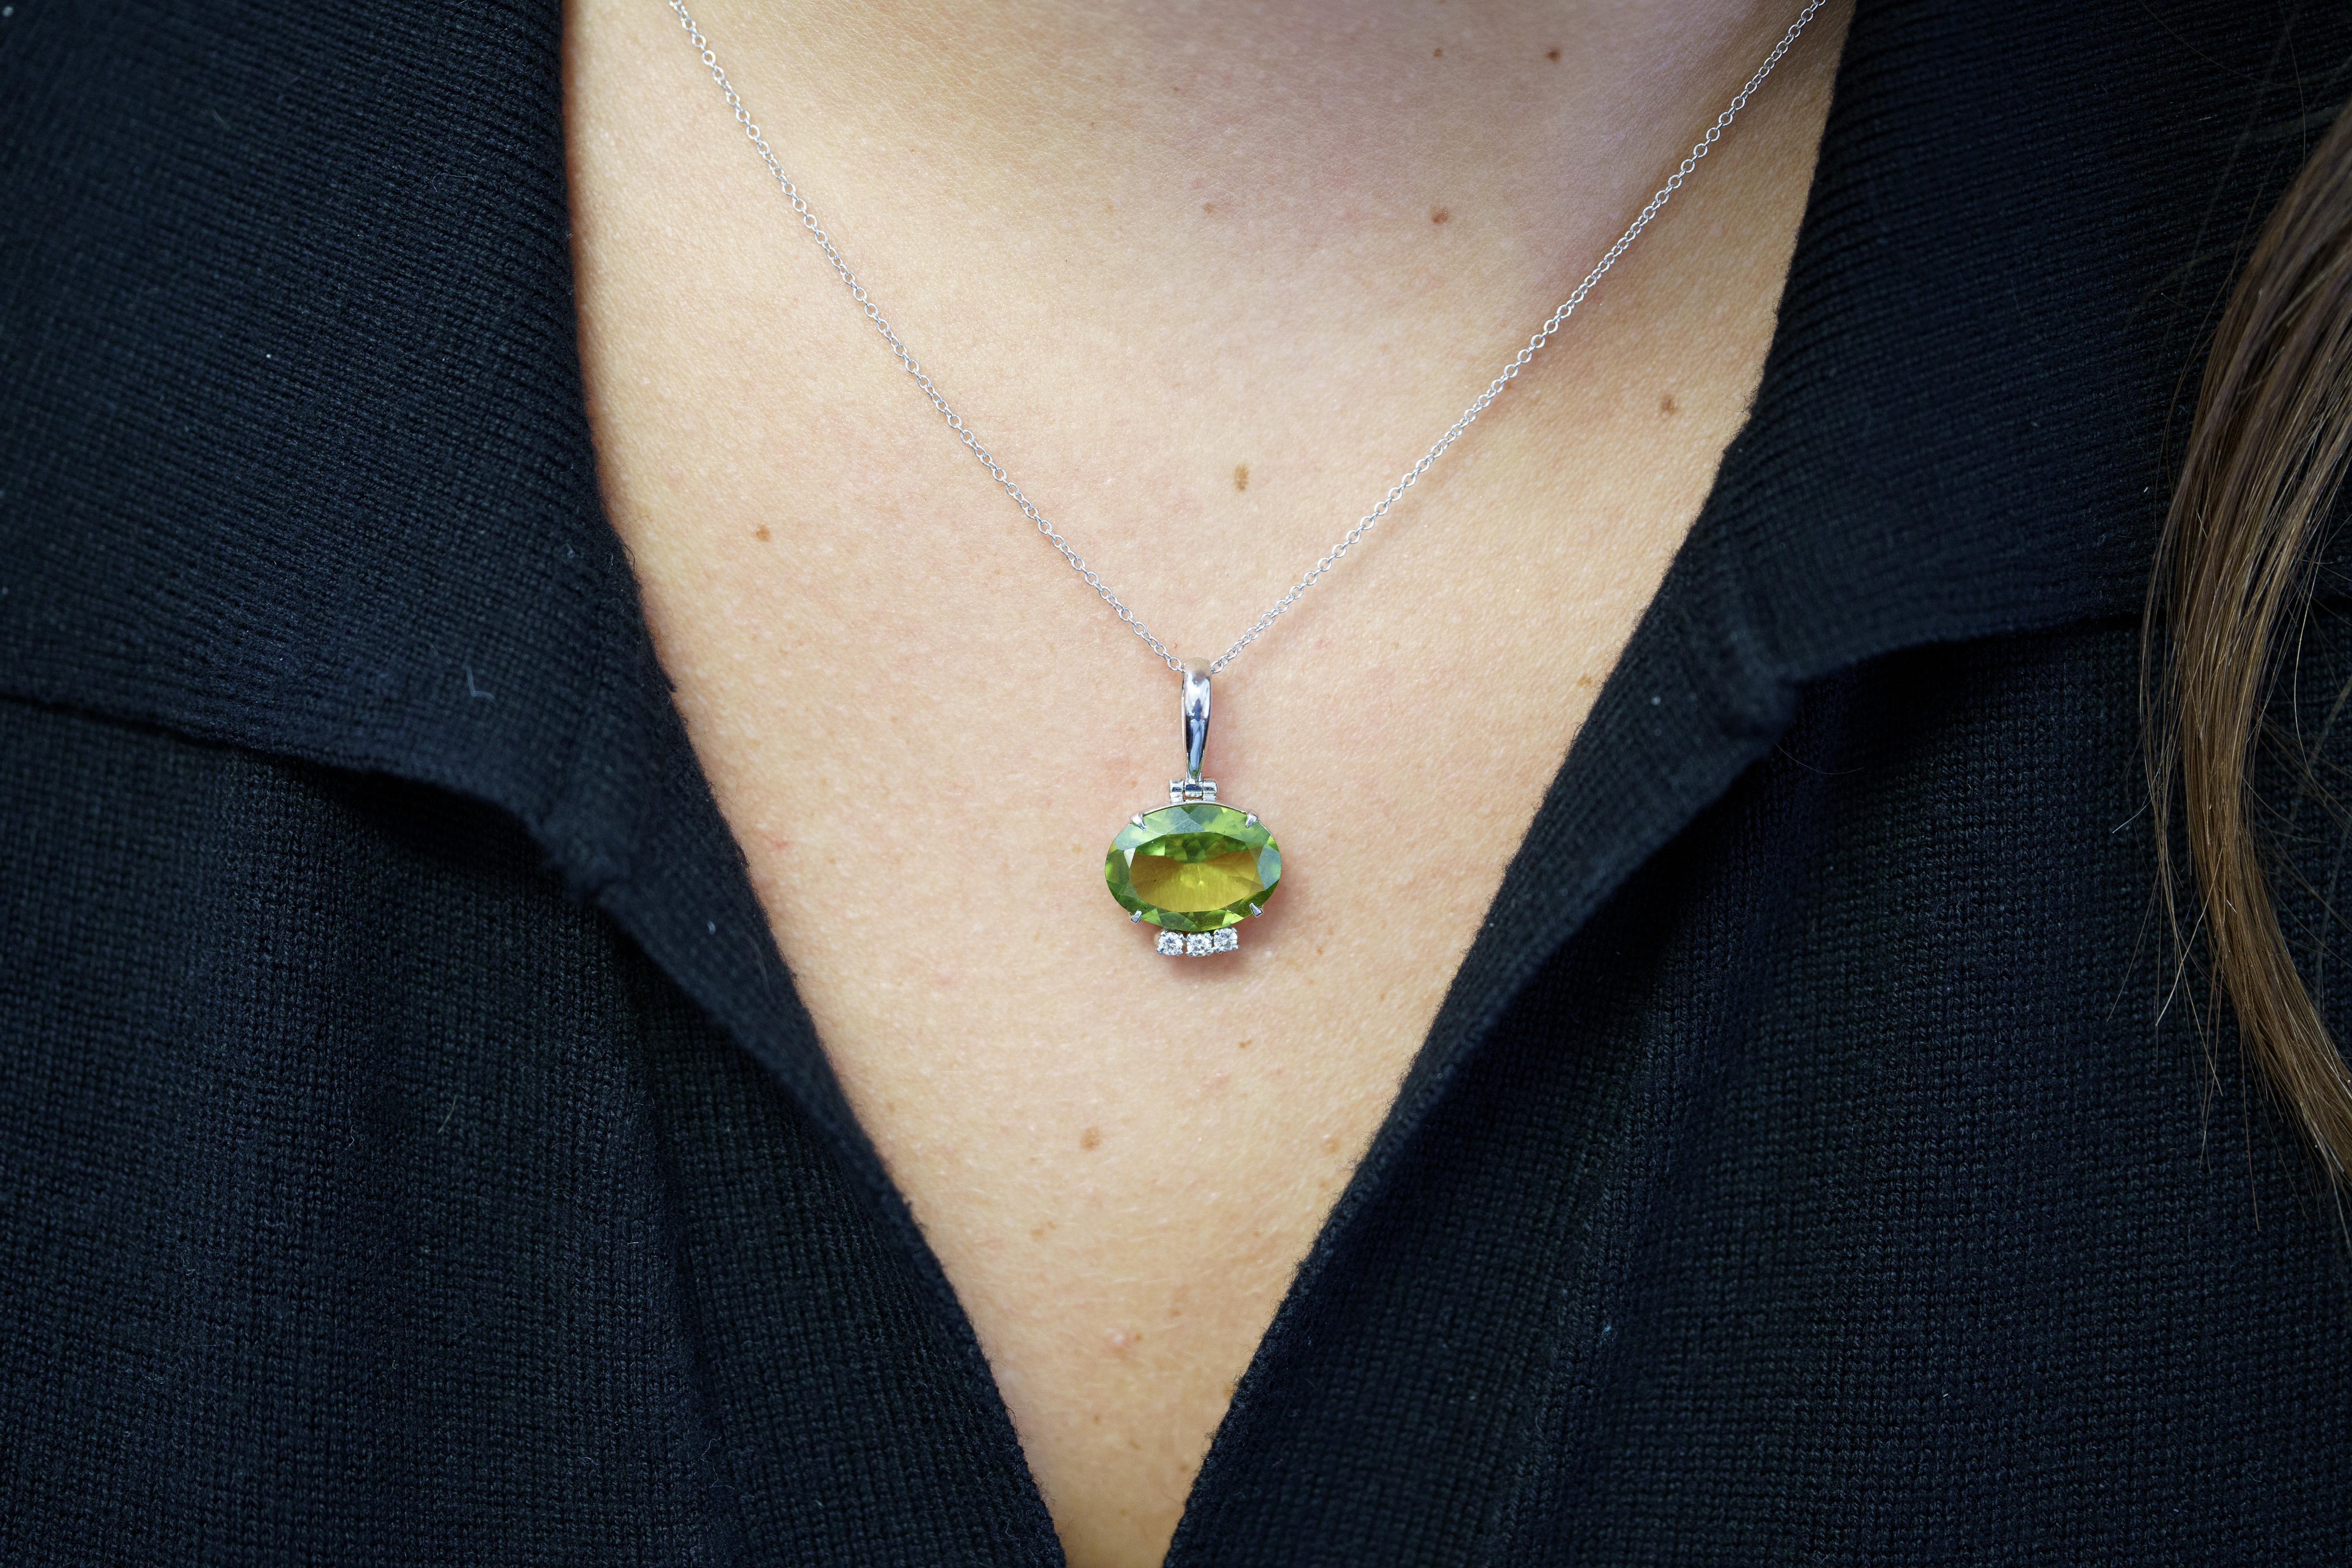 4.09 Carat Peridot Pendant Necklace in 18K White Gold Cable Chain